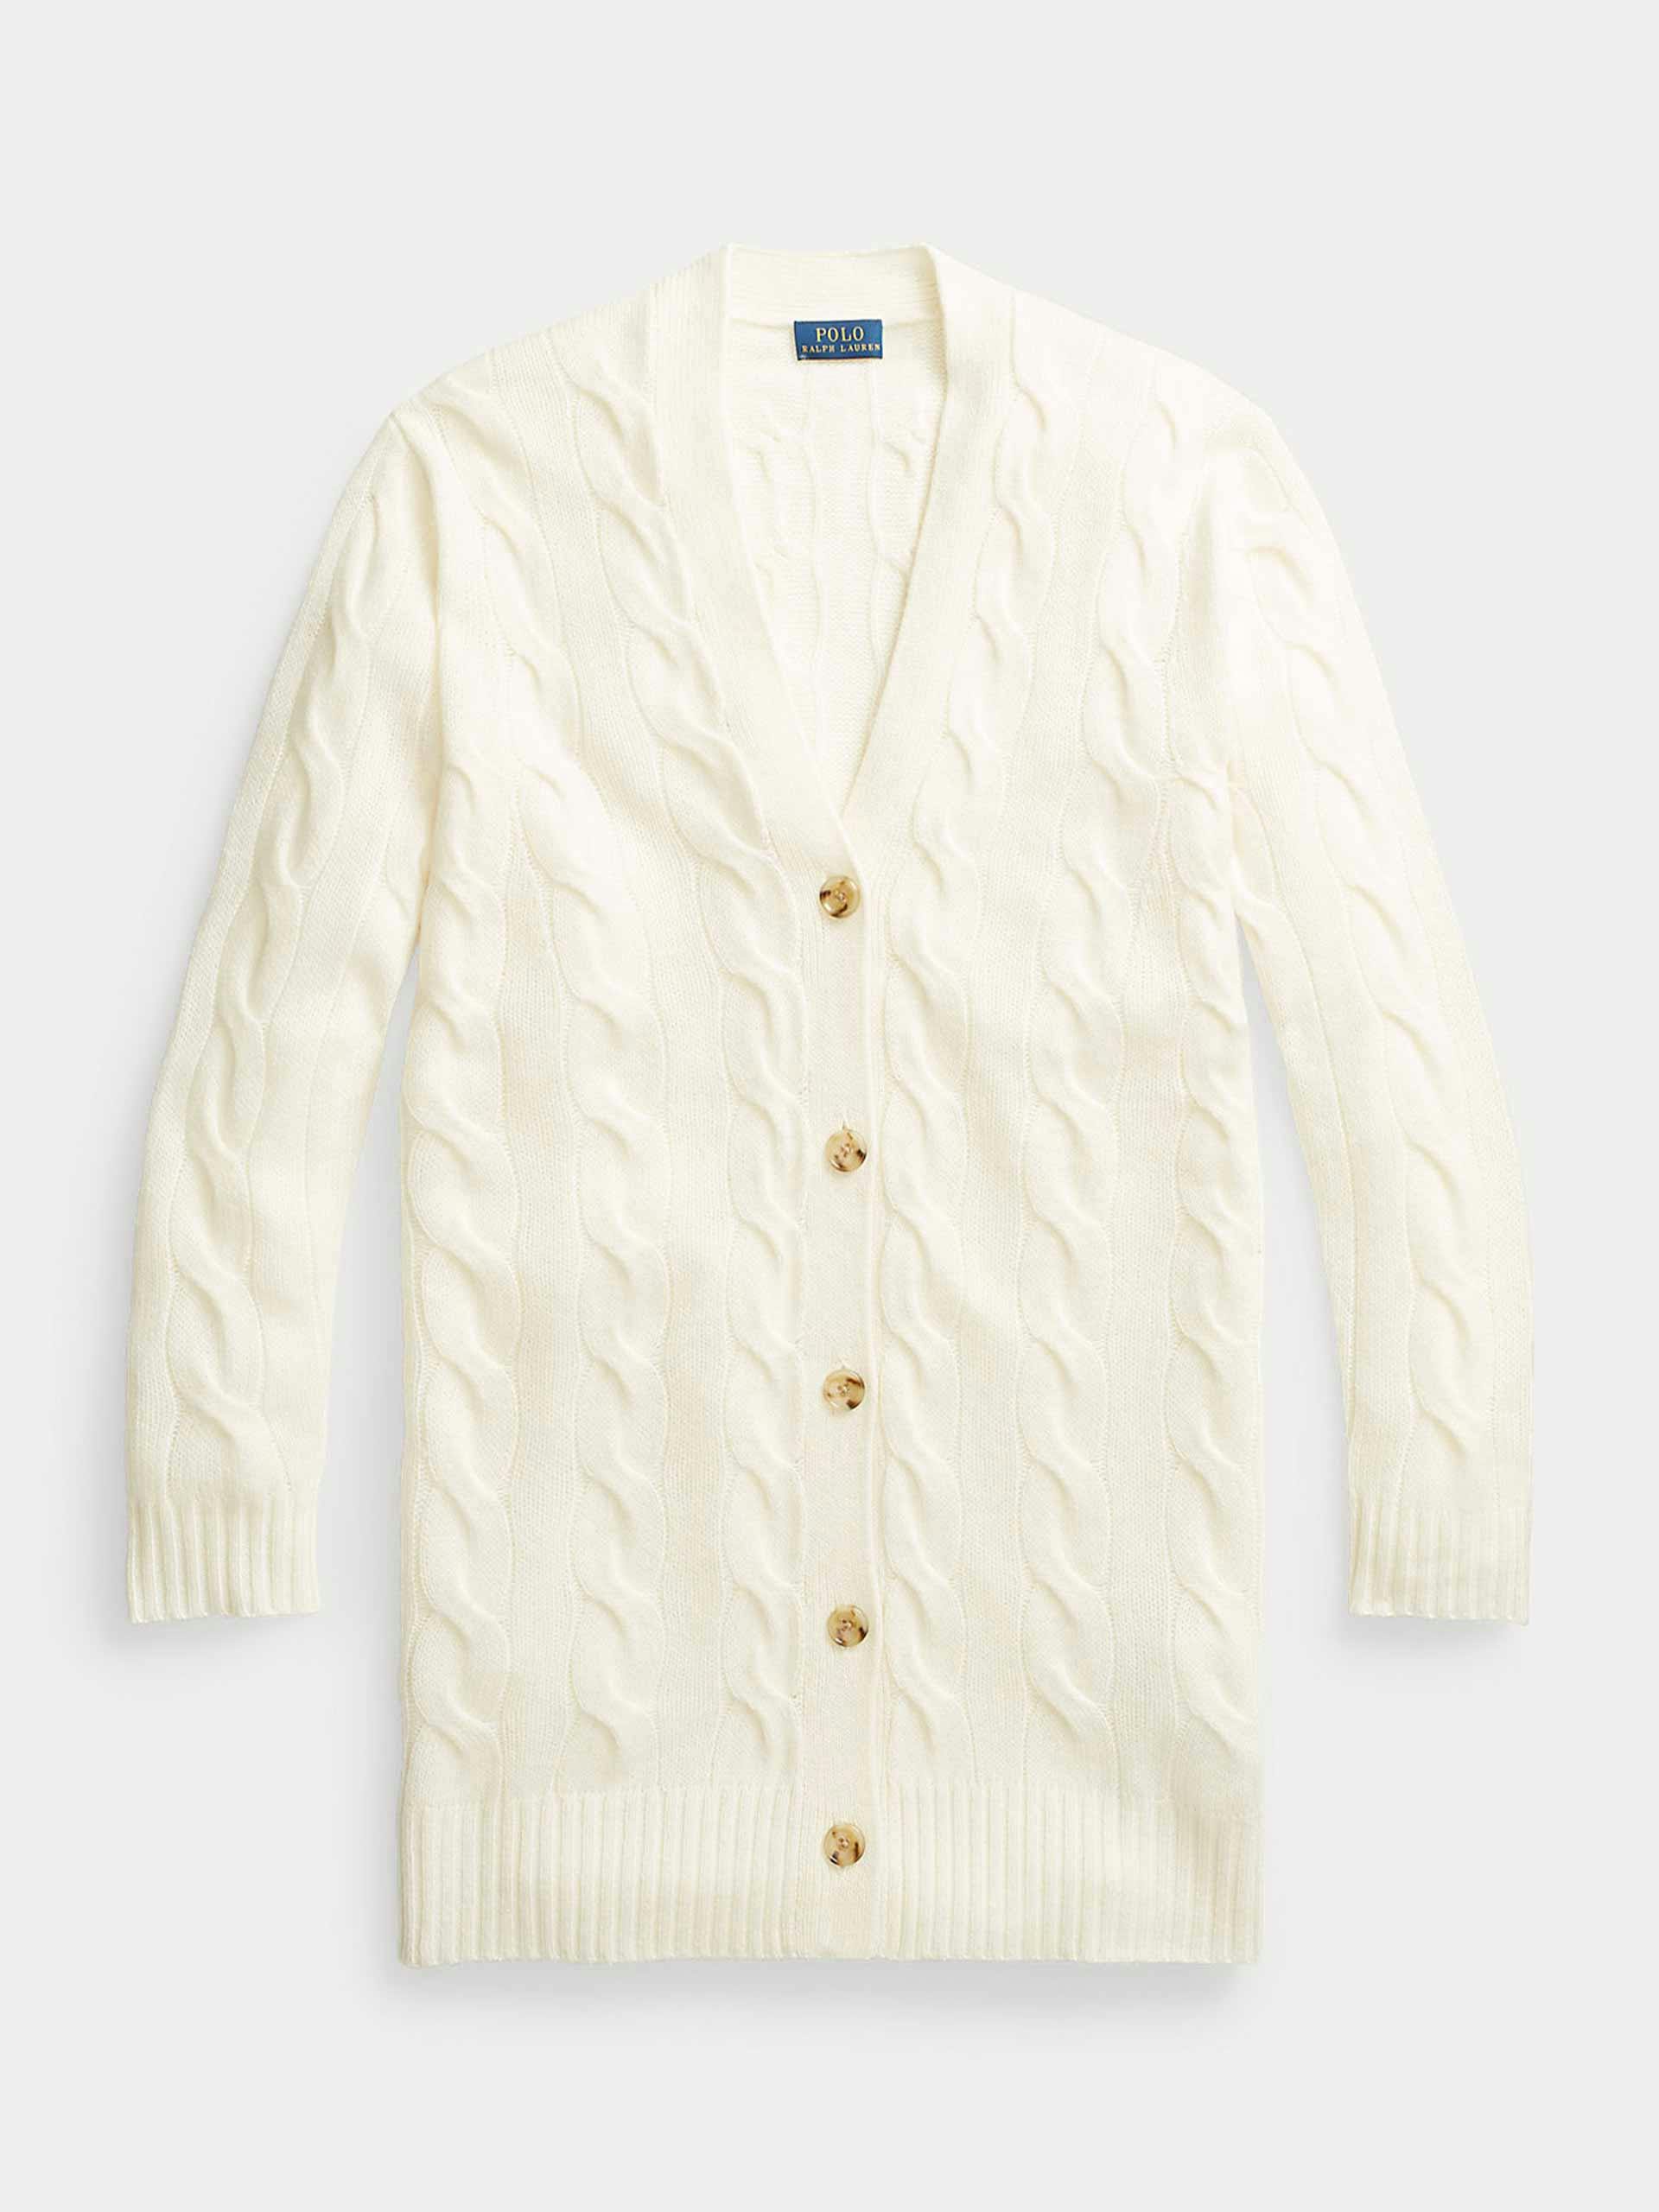 Cream cable-knit cashmere cardigan